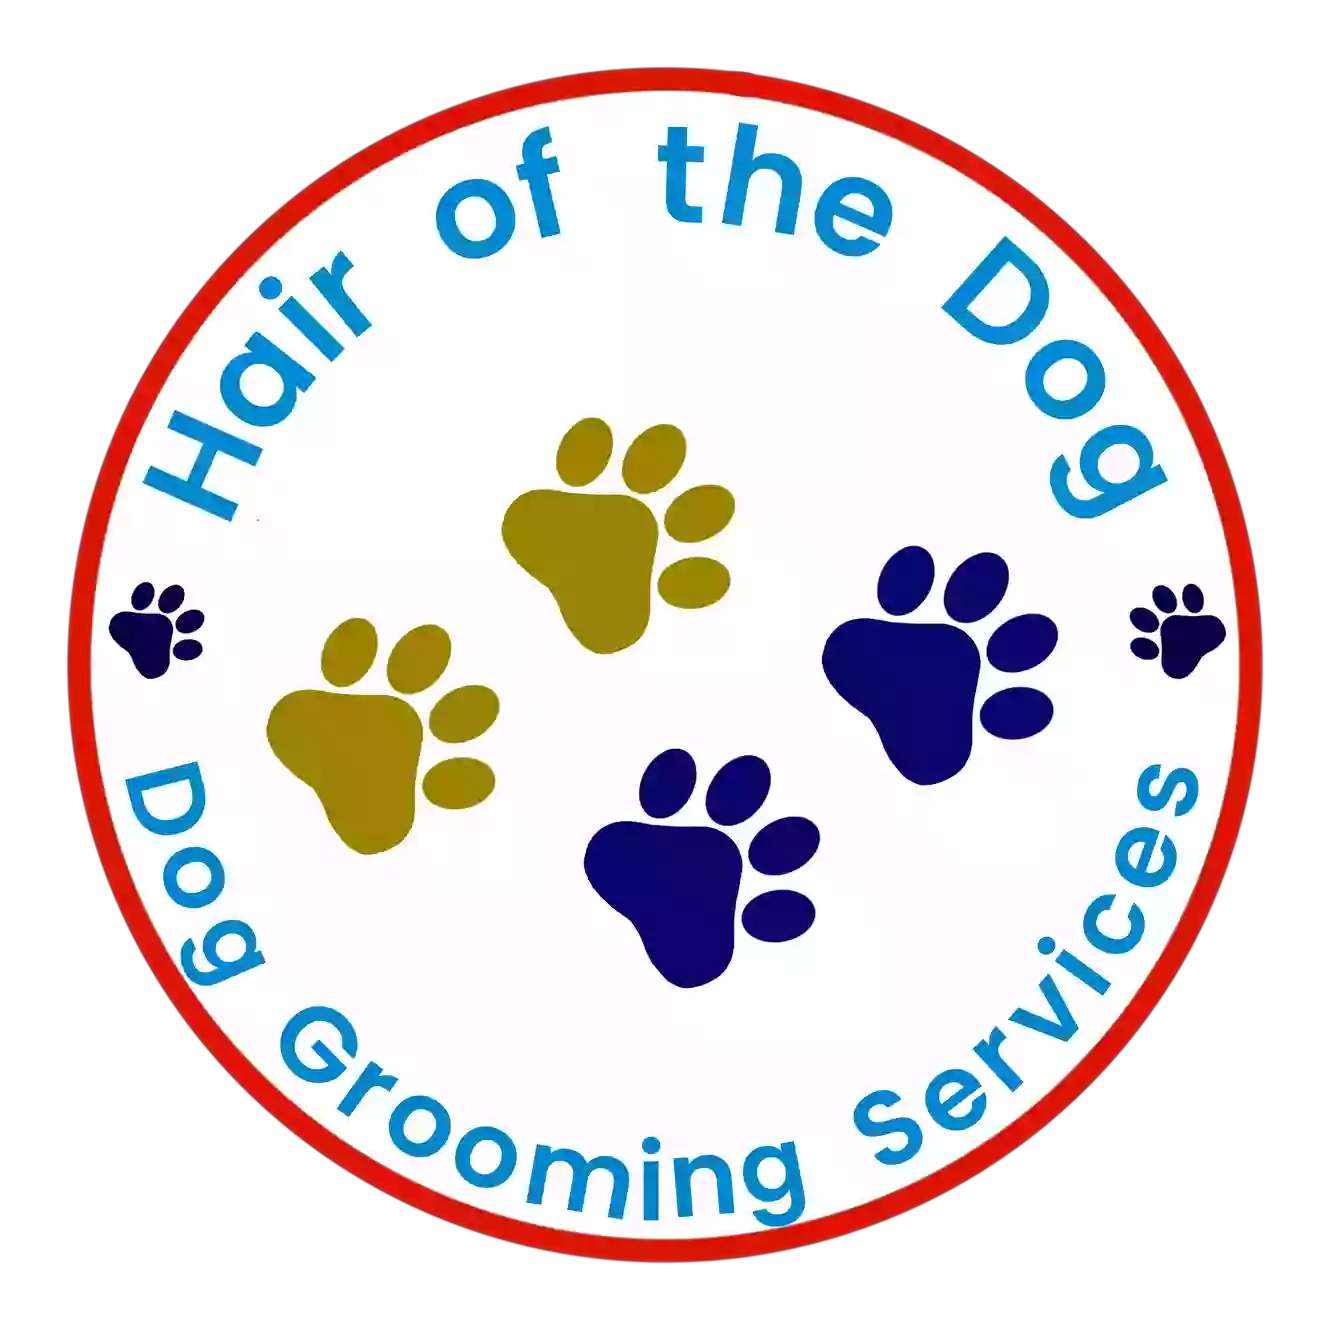 Hair of the Dog Dog Grooming Services